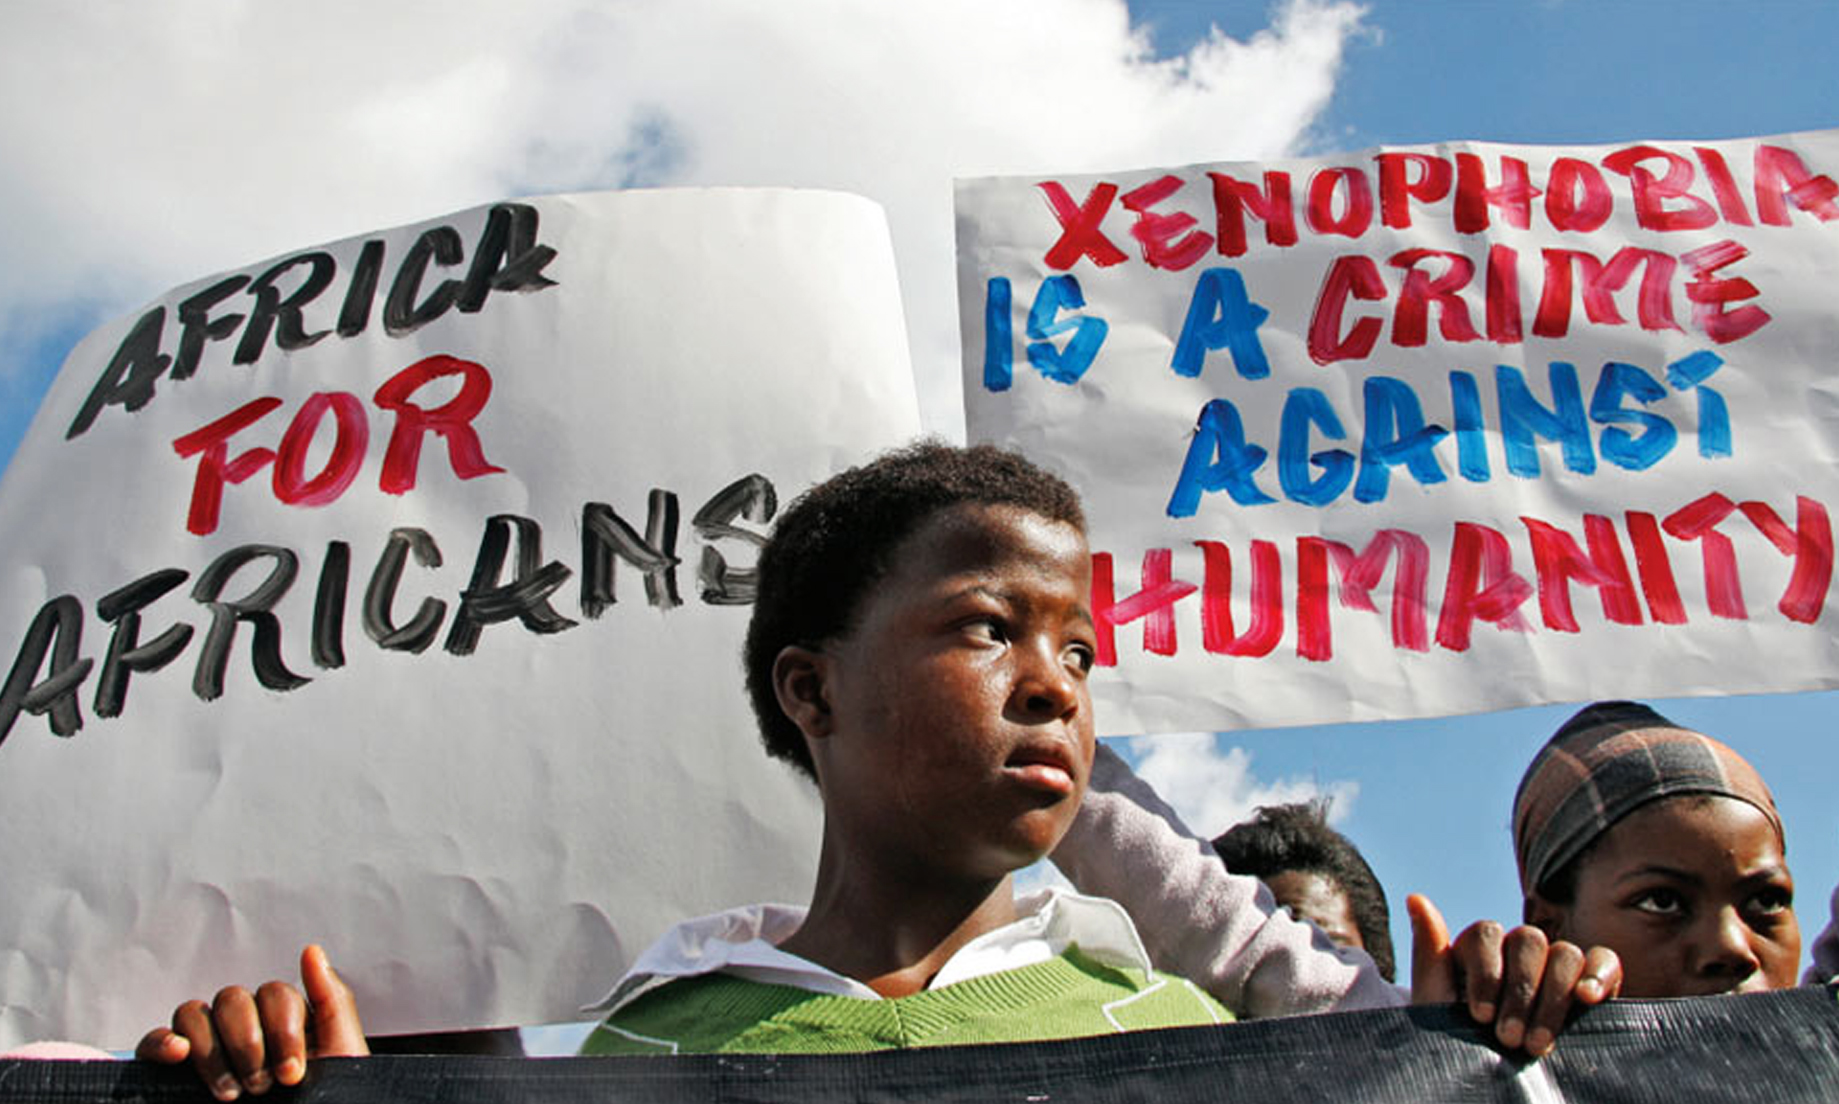 South Africa must prosecute perpetrators of xenophobic attacks